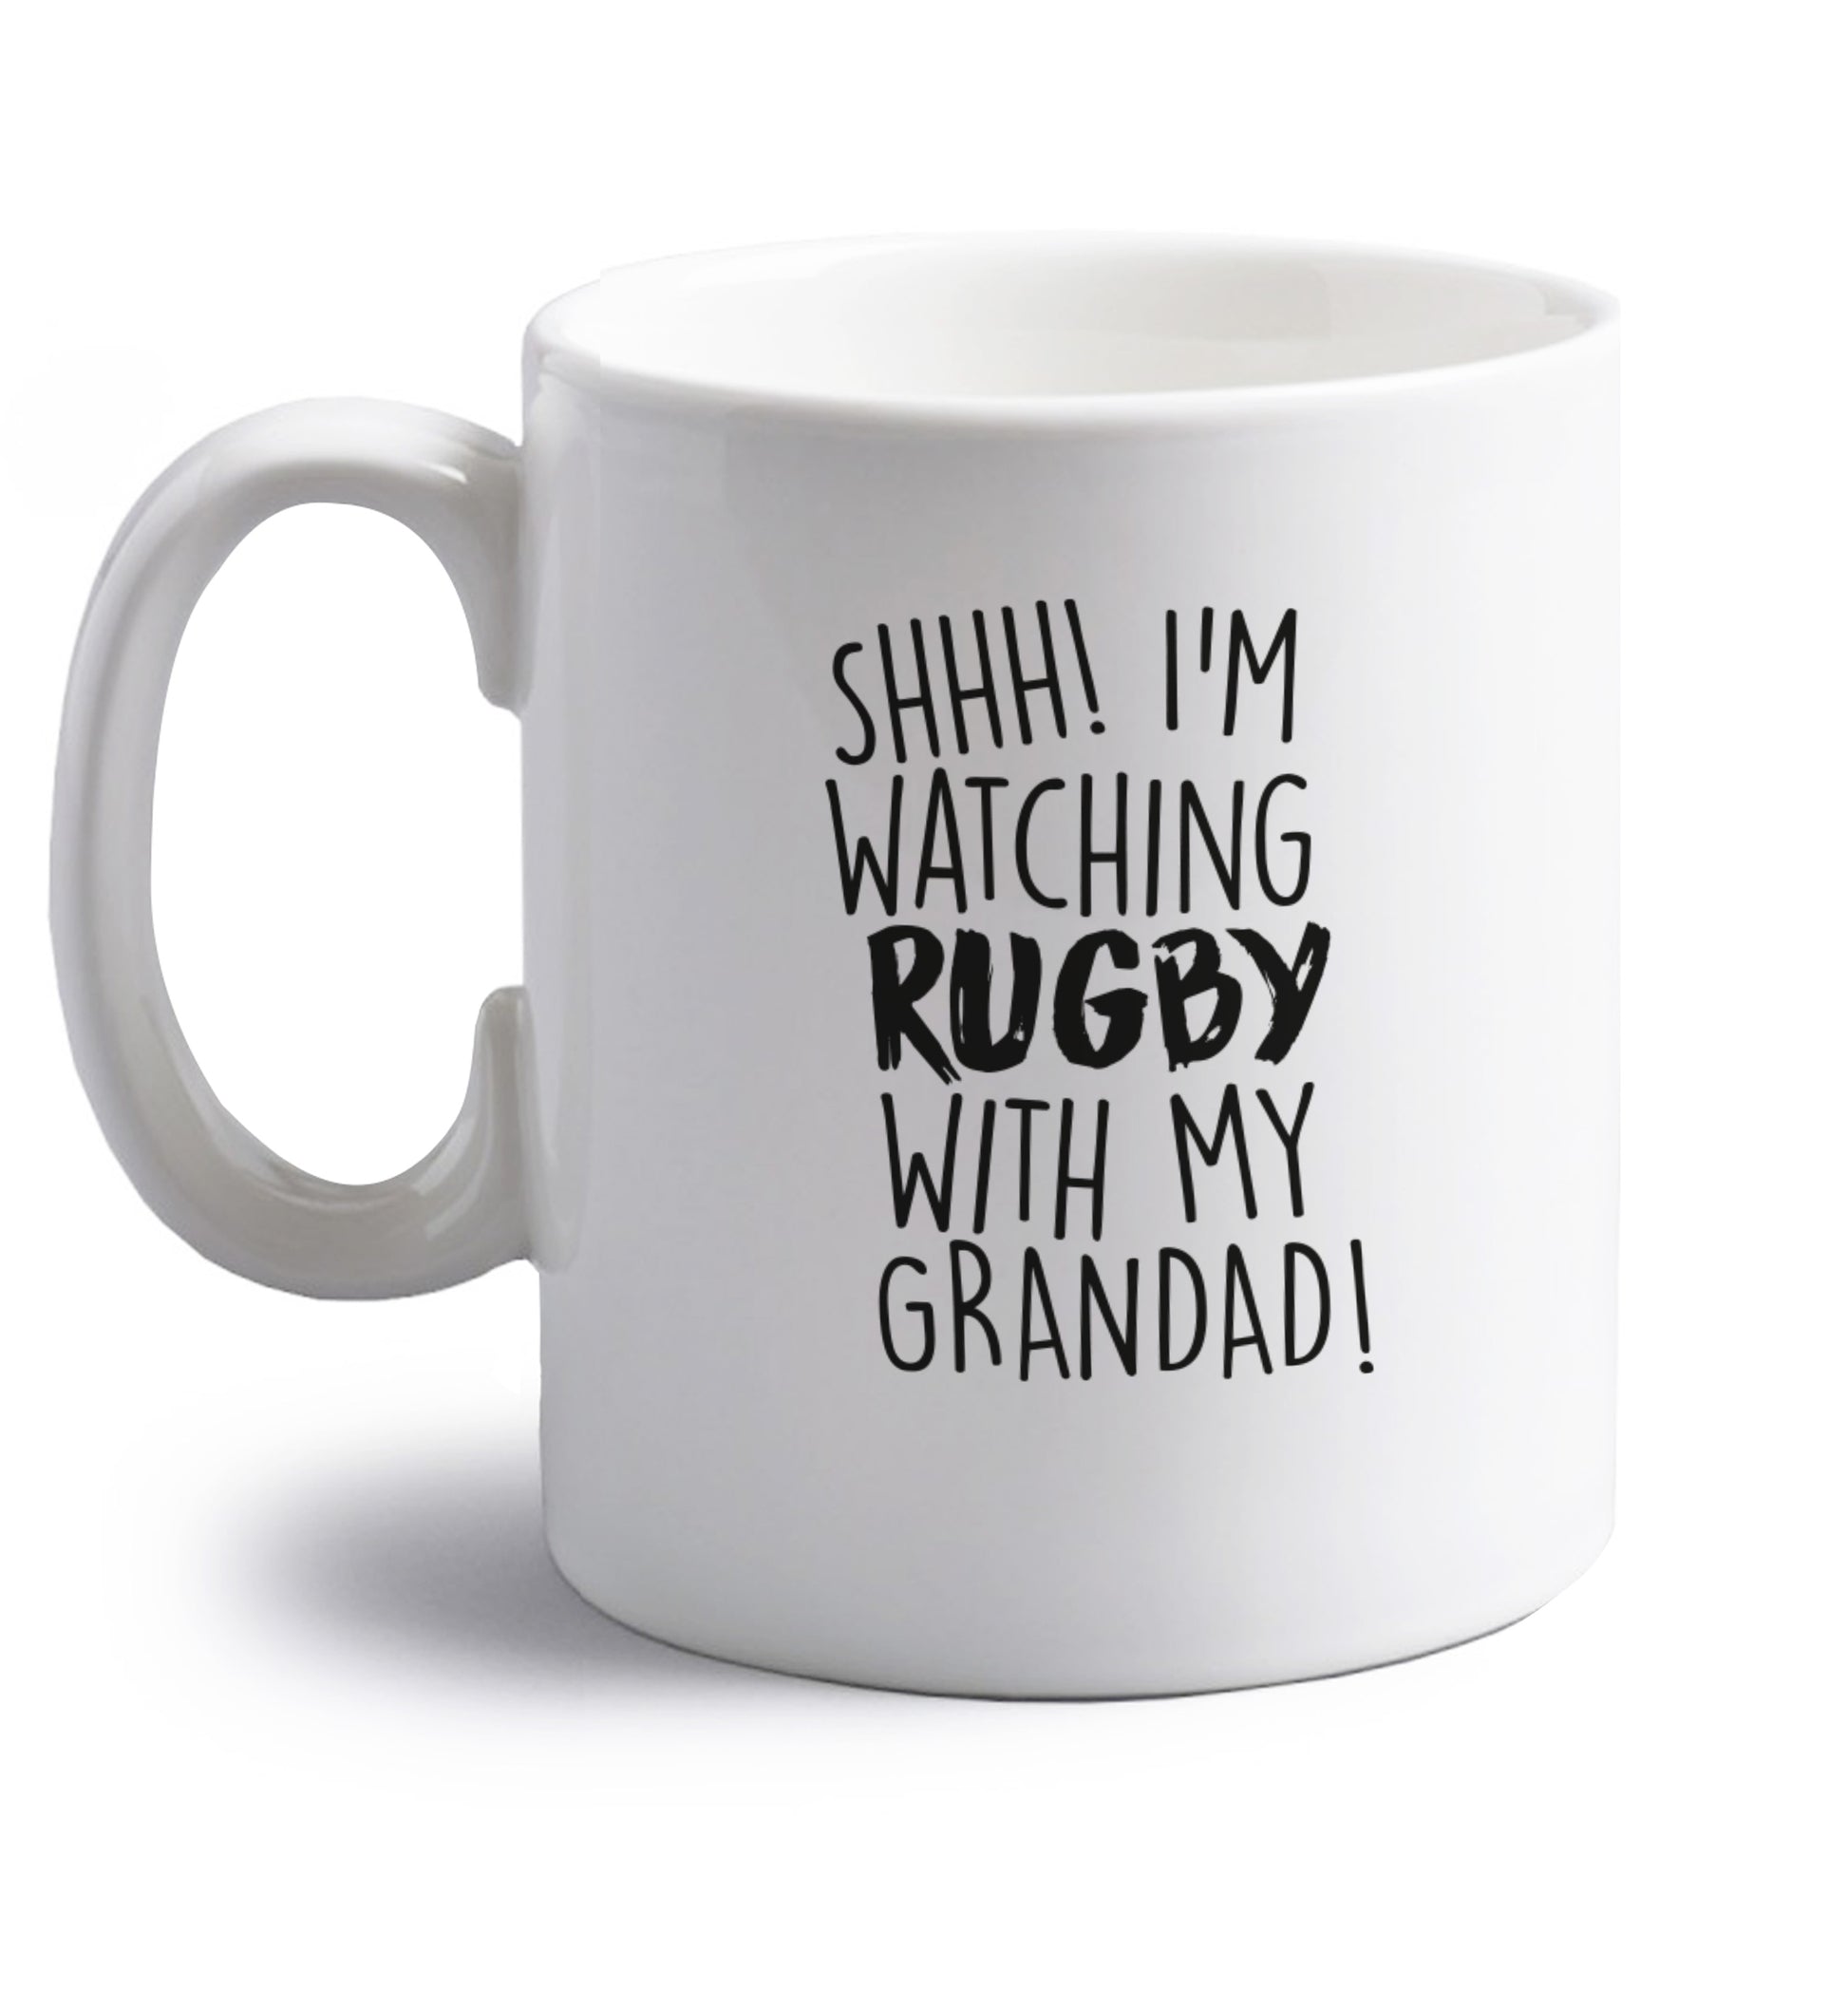 Shh I'm watching rugby with my grandaughter right handed white ceramic mug 